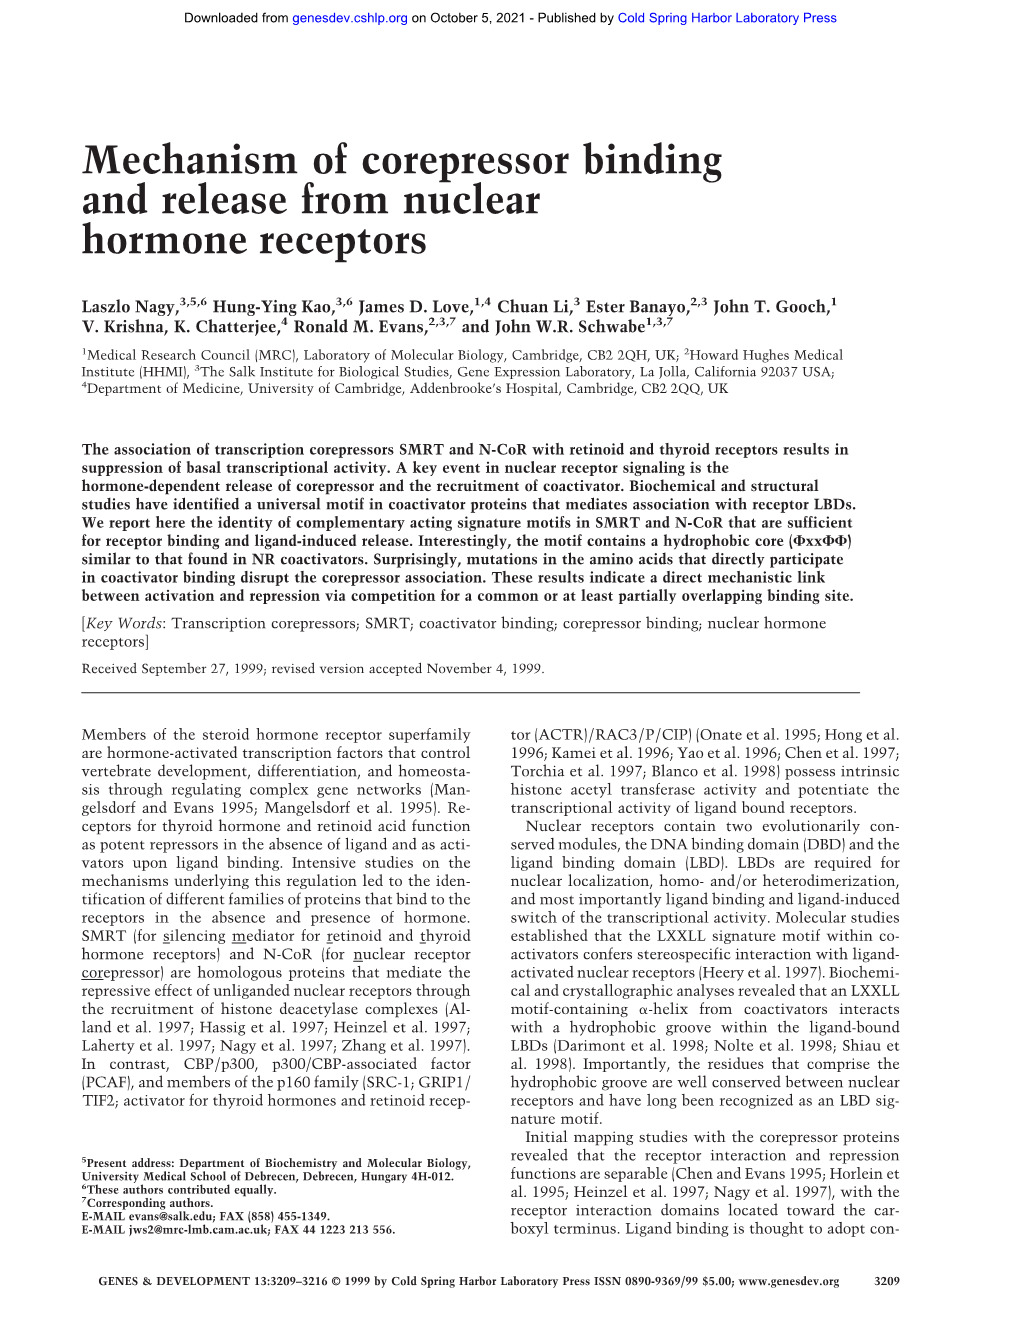 Mechanism of Corepressor Binding and Release from Nuclear Hormone Receptors